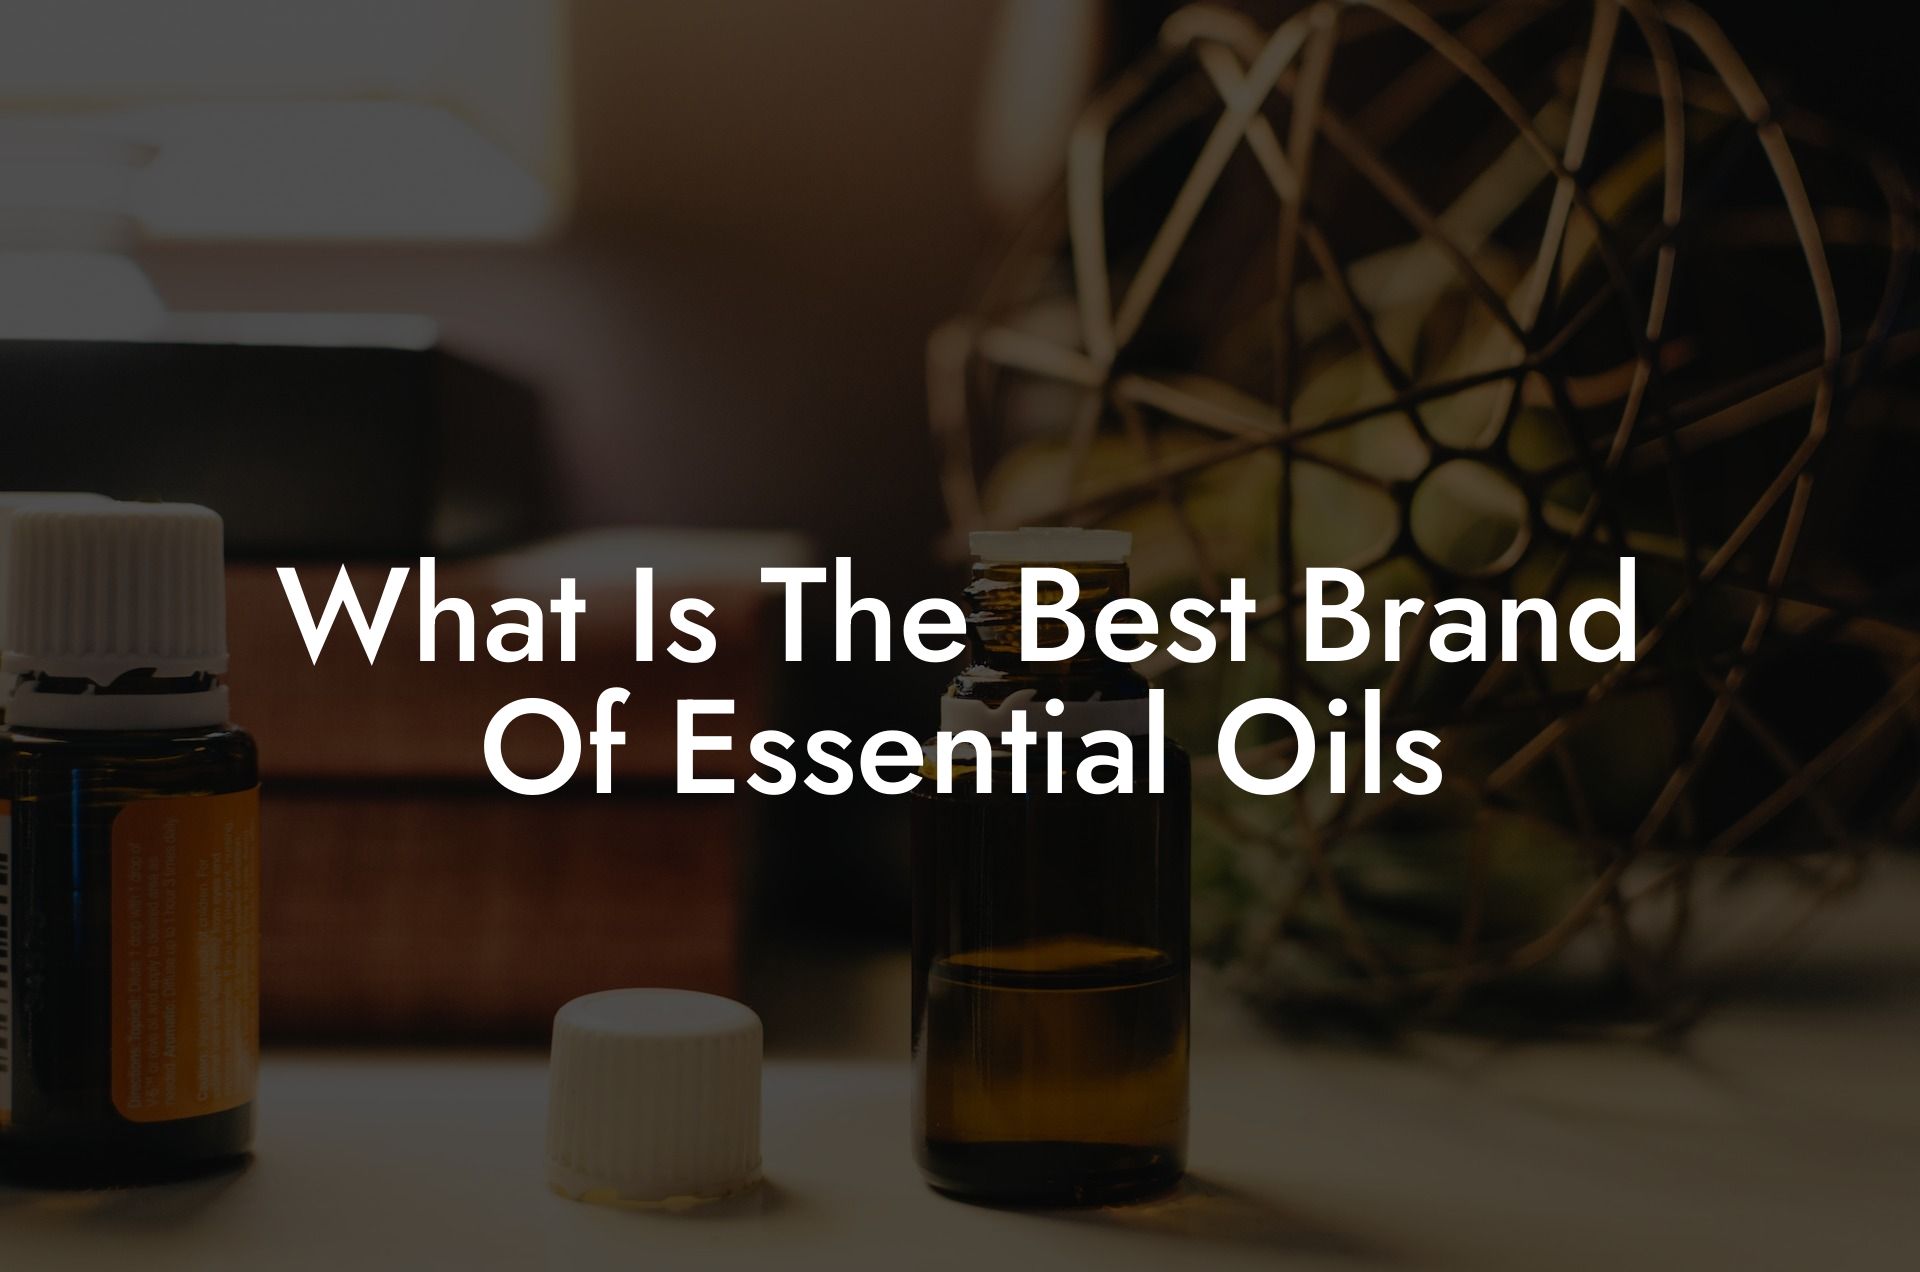 What Is The Best Brand Of Essential Oils